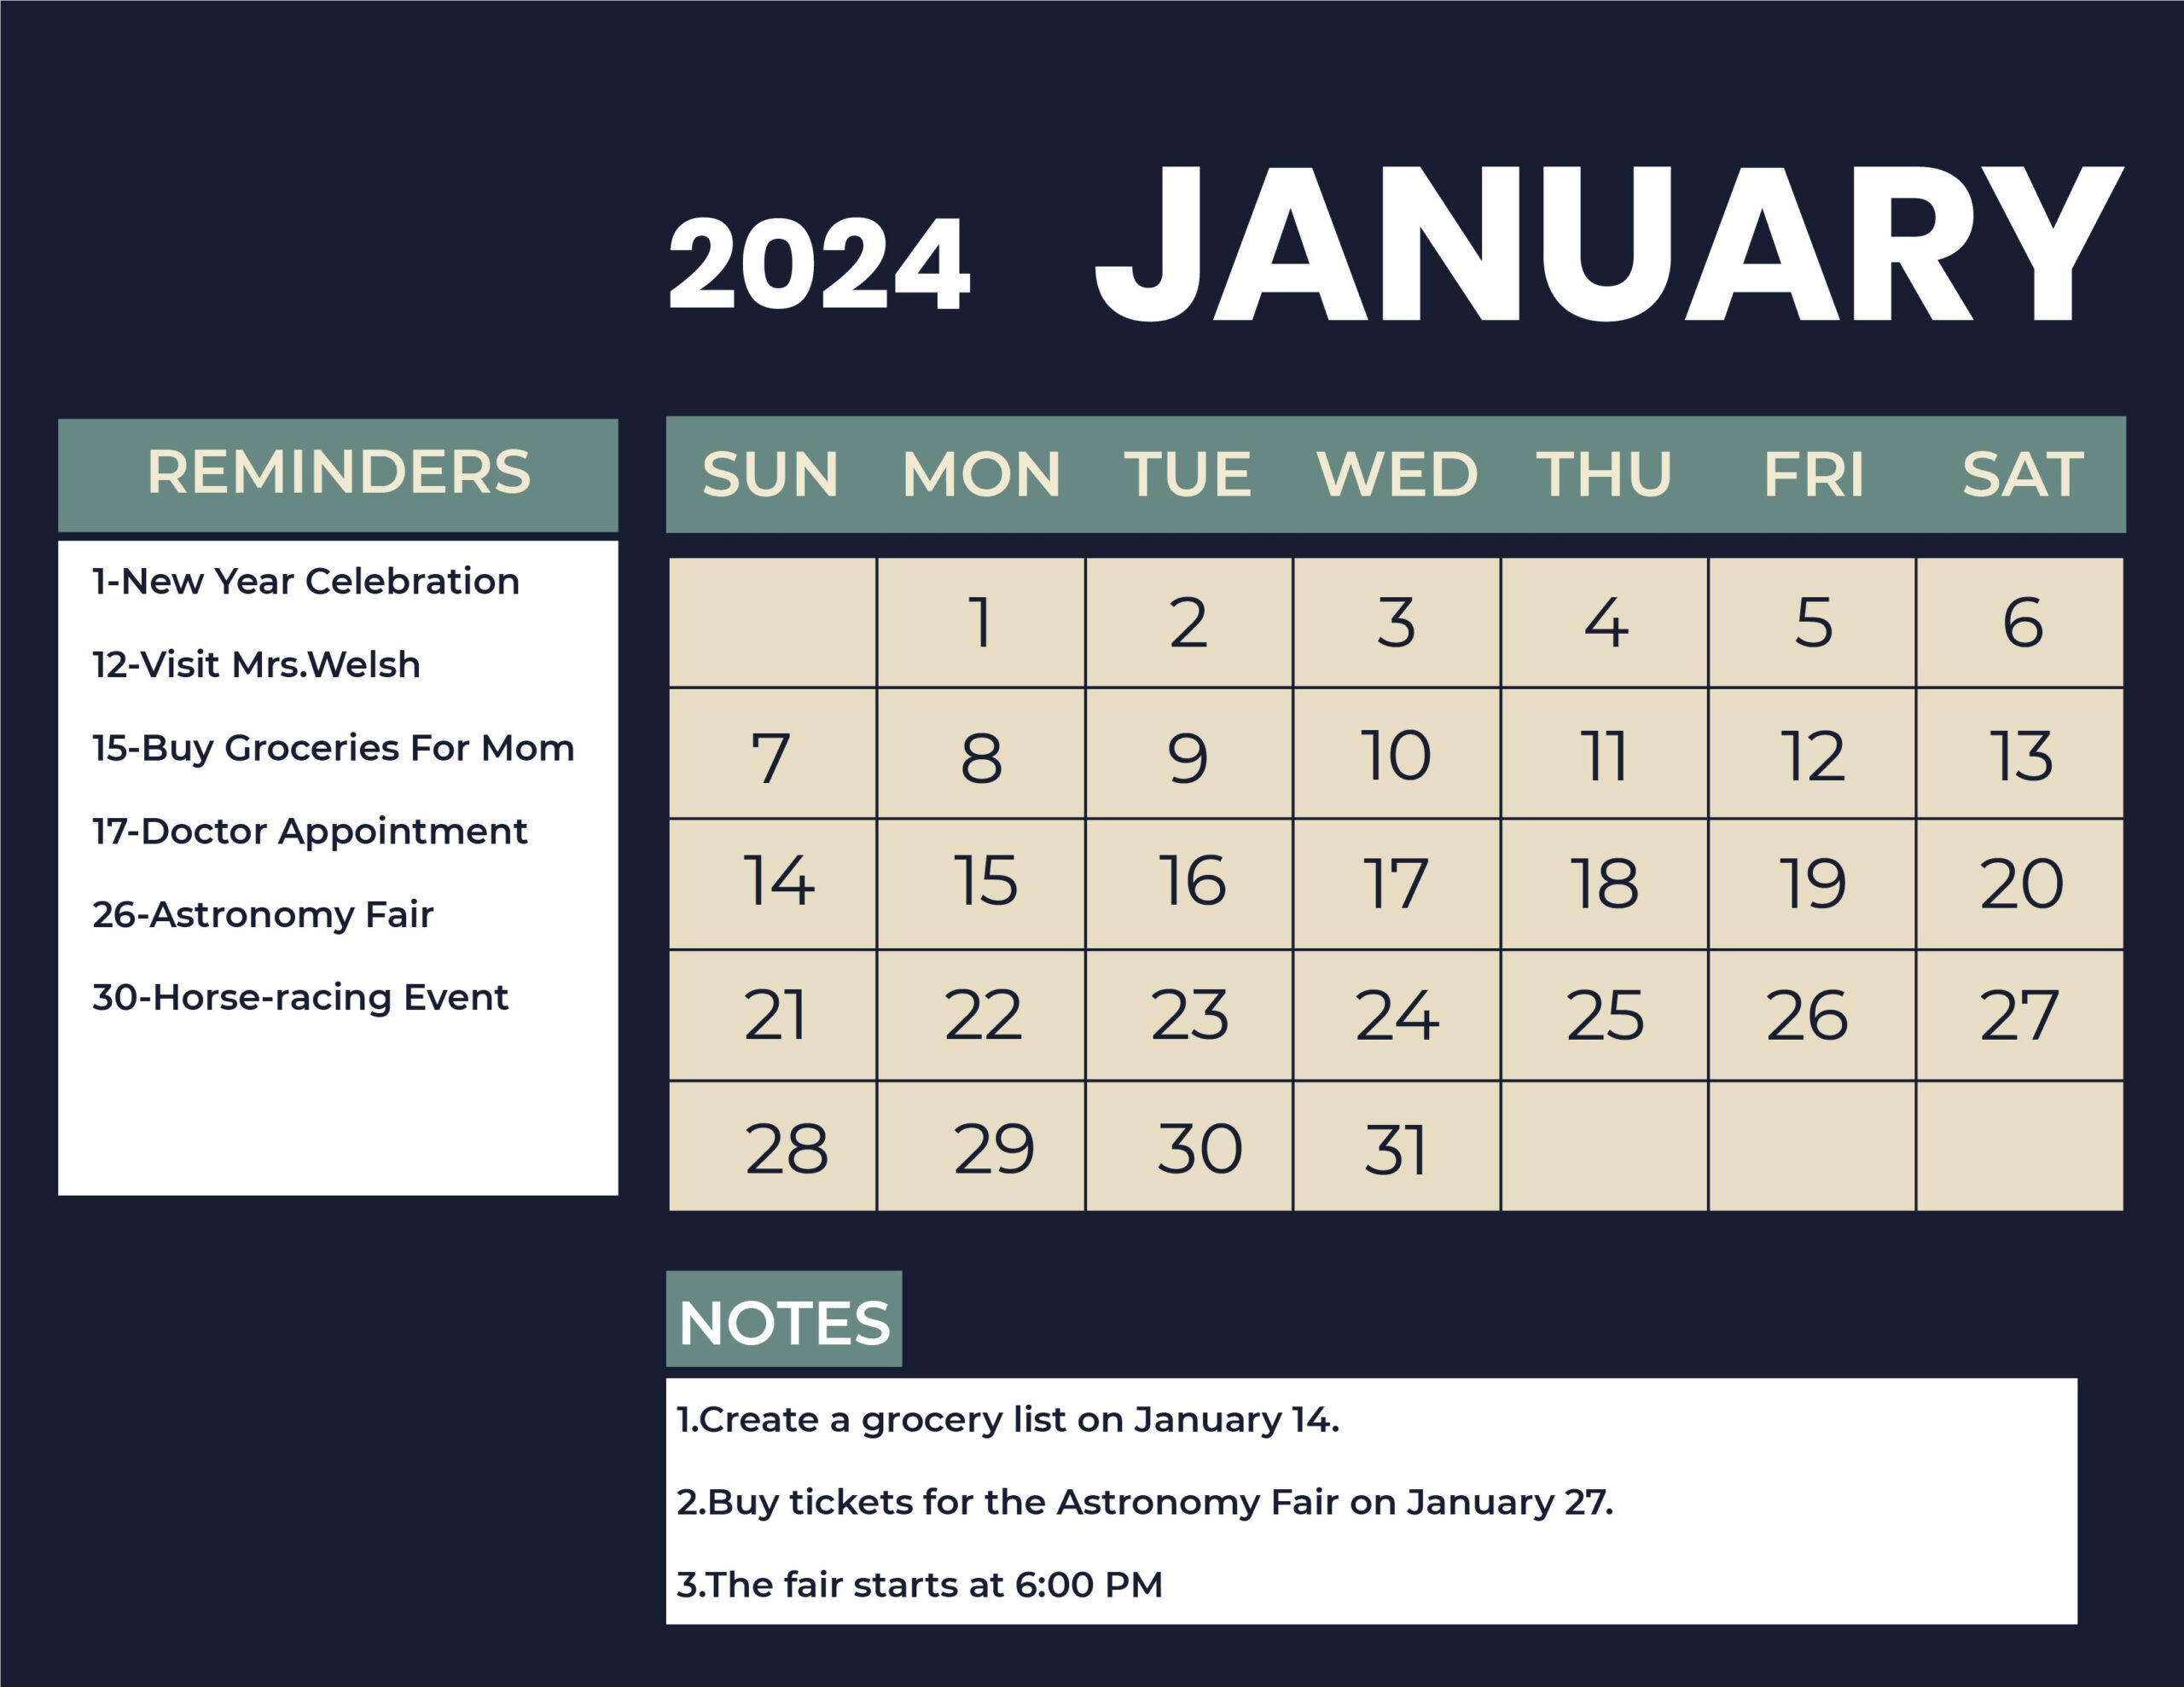 January 2024 Monthly Calendar - Download In Word, Illustrator, Eps | Printable Calendar 2024 Monthly Word